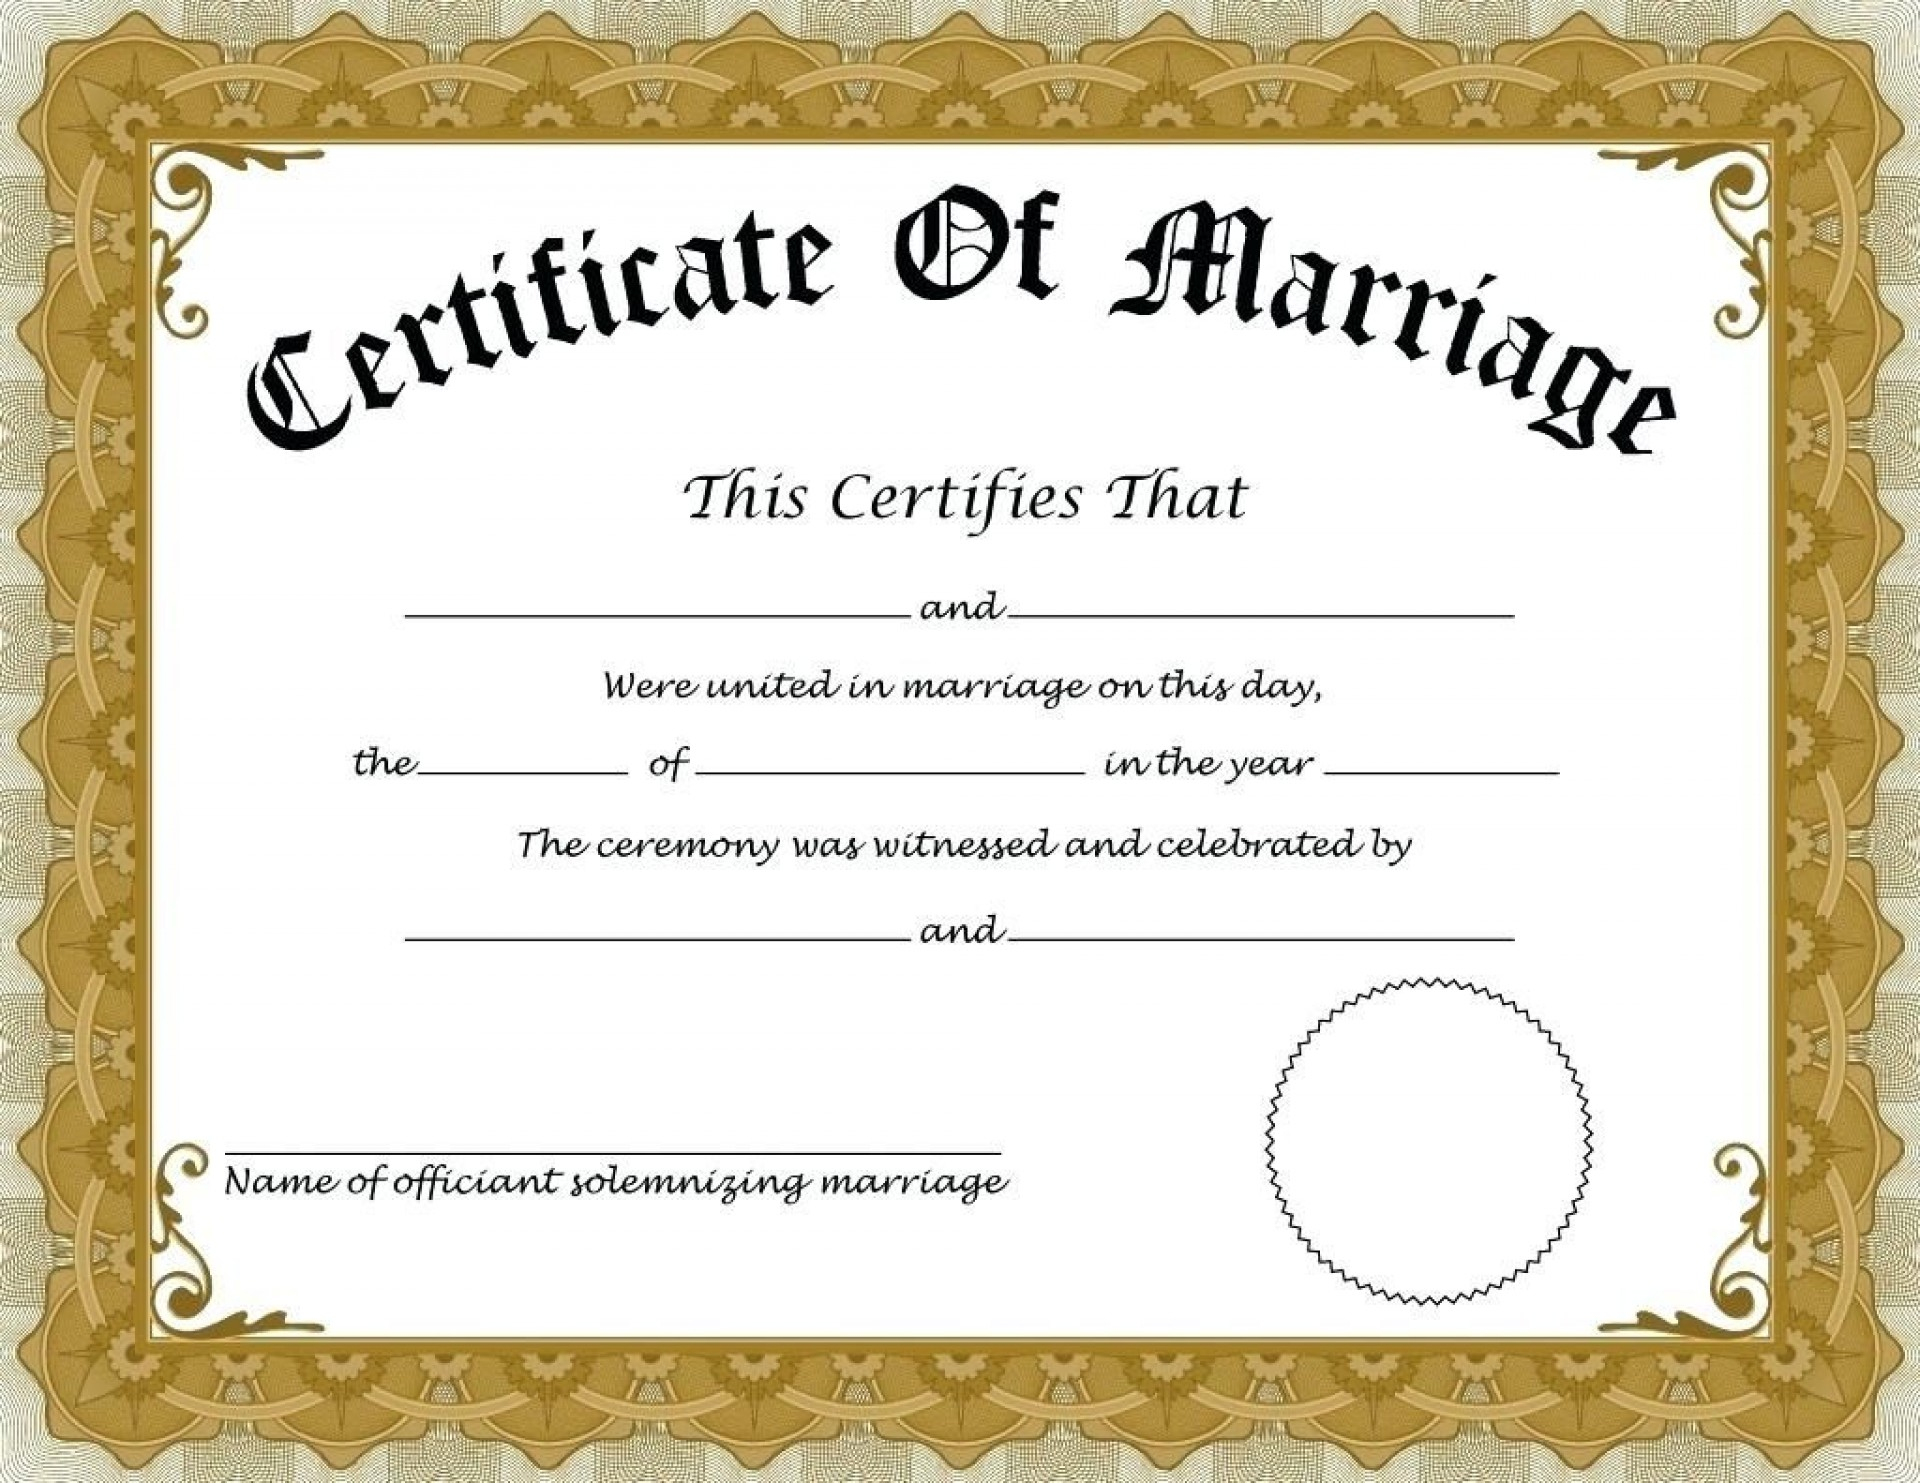 015 Template Ideas Fake Marriage Certificate Free Editable - Fake Marriage Certificate Printable Free